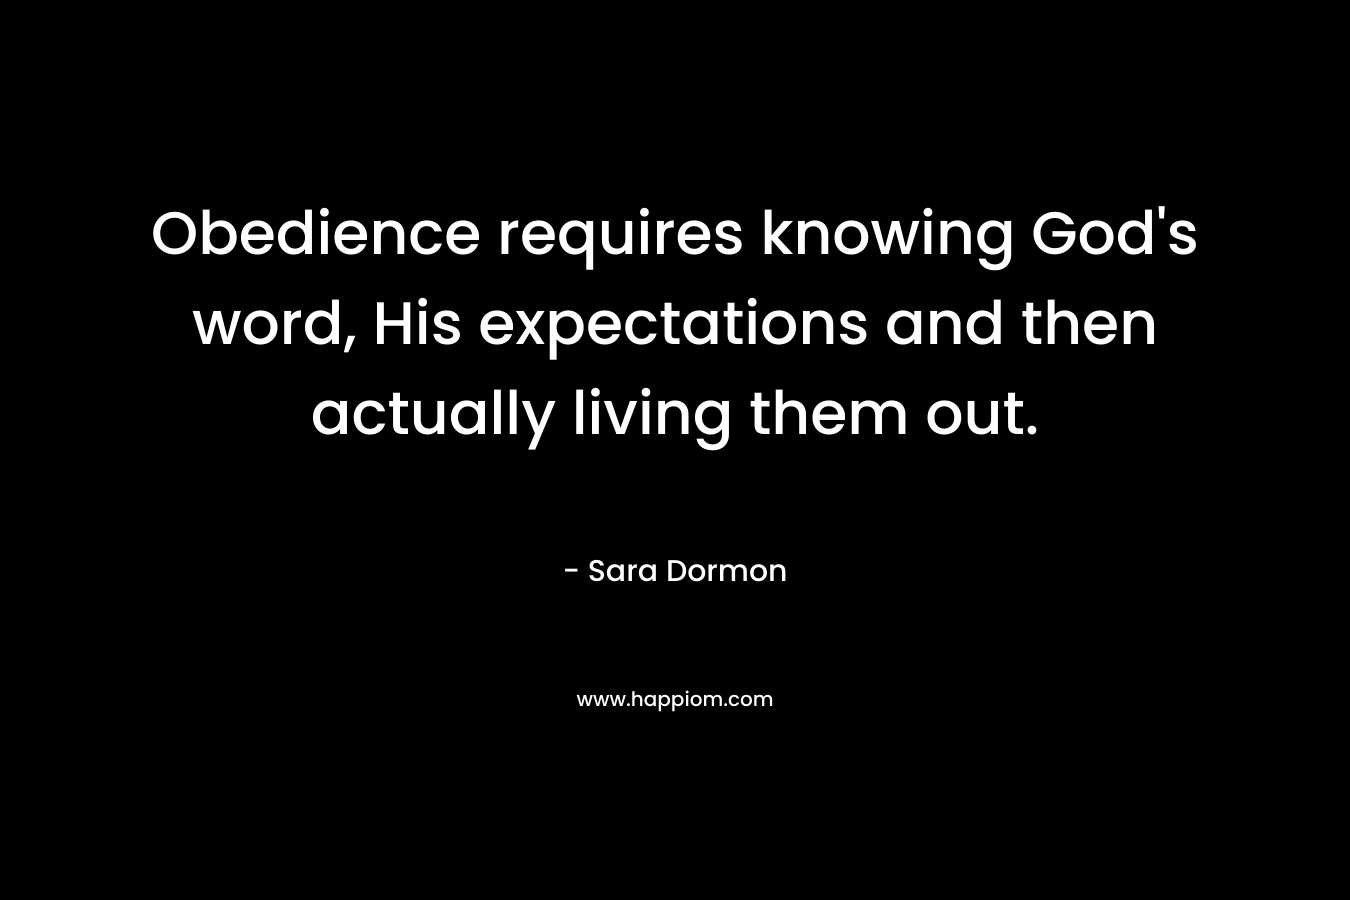 Obedience requires knowing God's word, His expectations and then actually living them out.